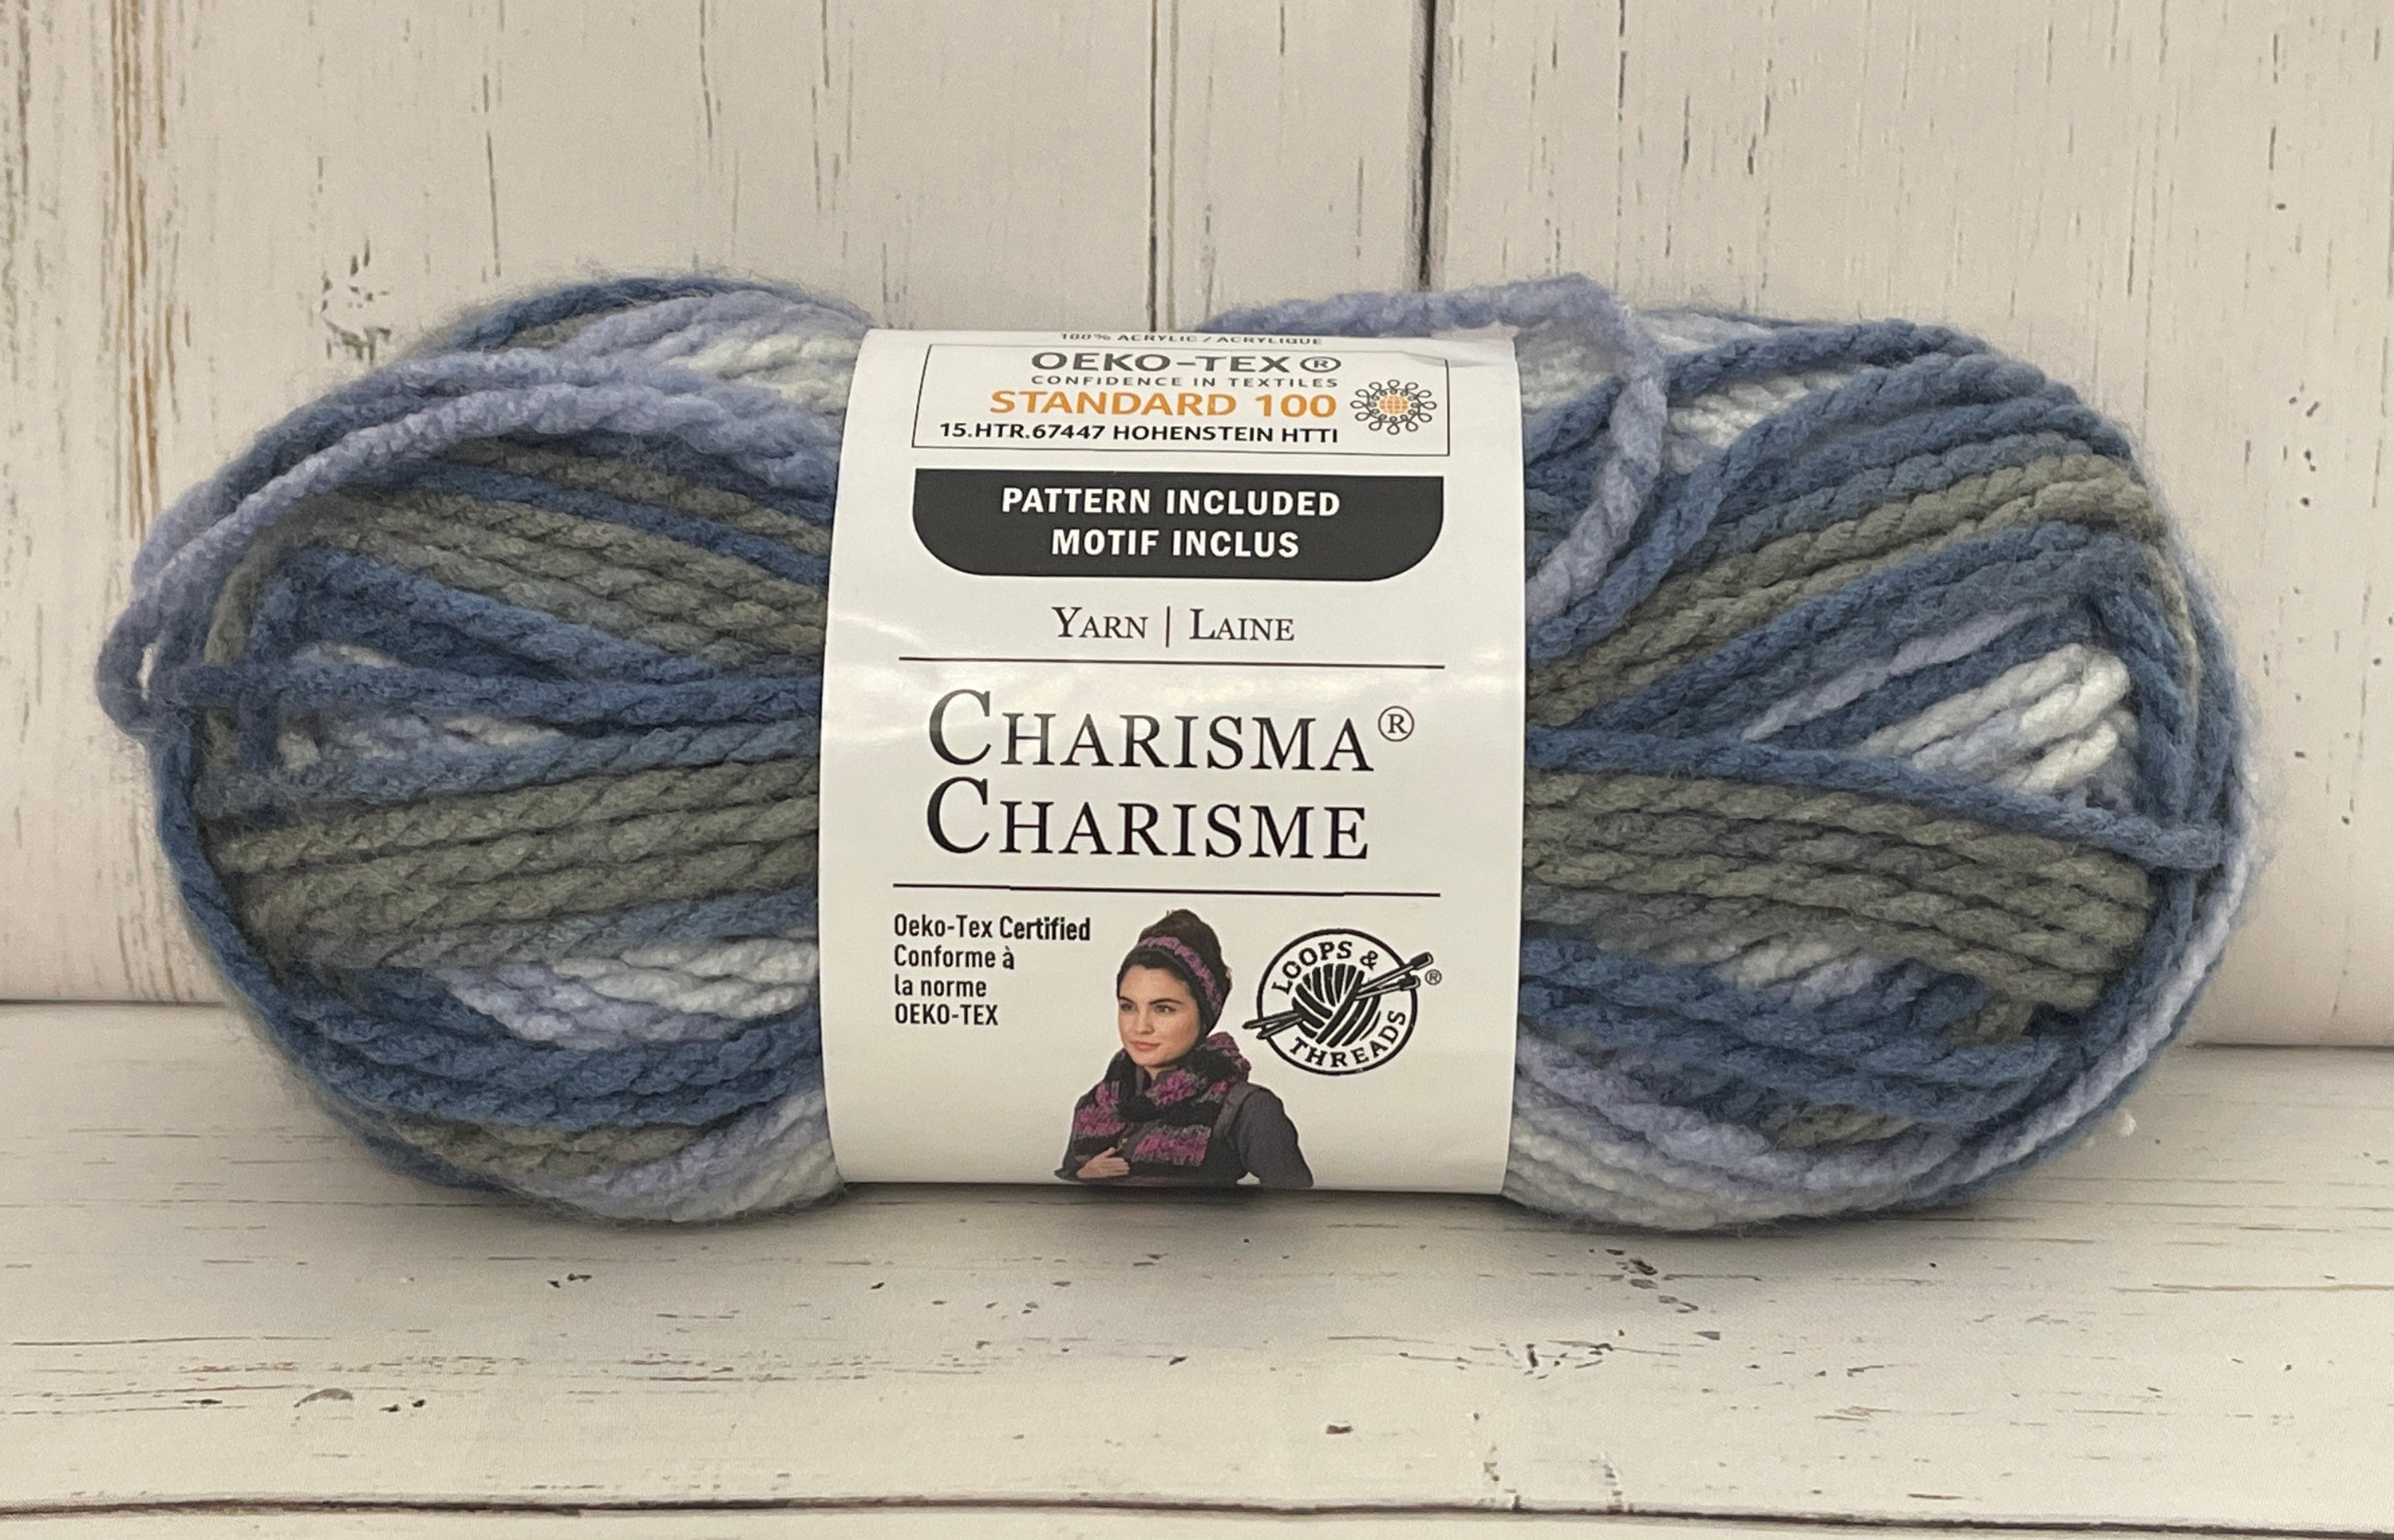 15 Pack: Charisma Sorbet Yarn by Loops & Threads, Size: 3.5, Silver